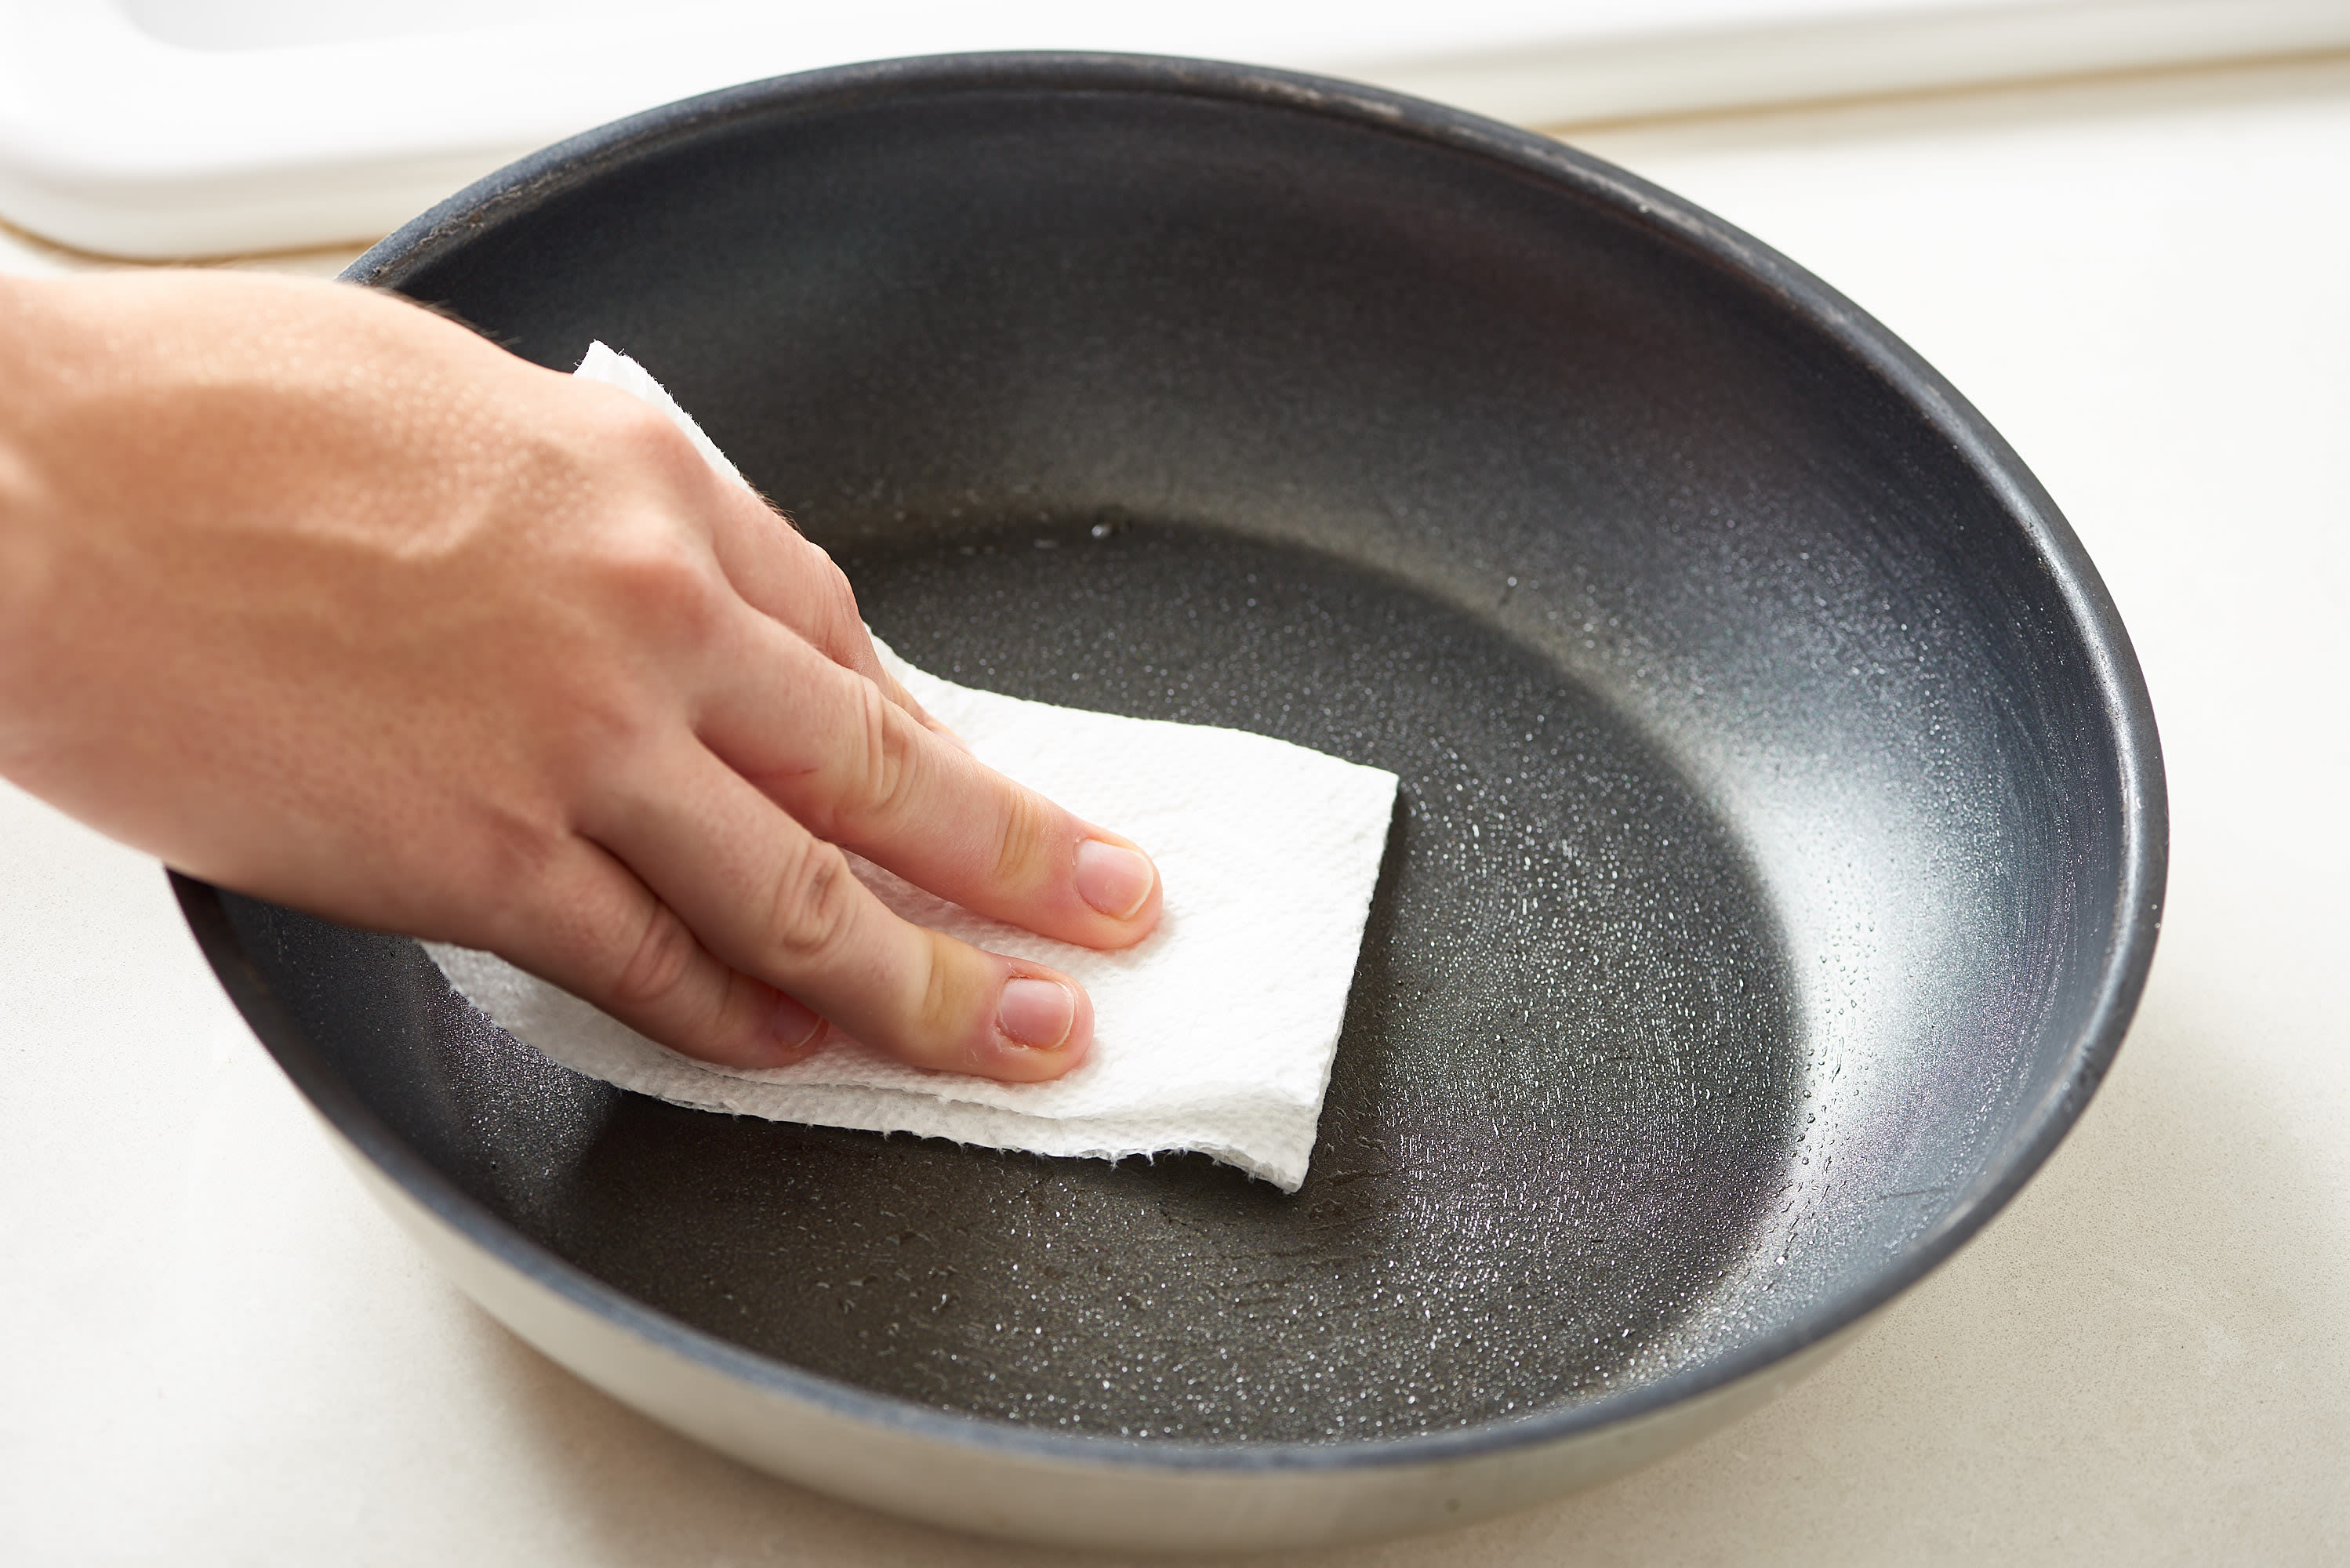 How to clean nonstick pans the safe and easy way